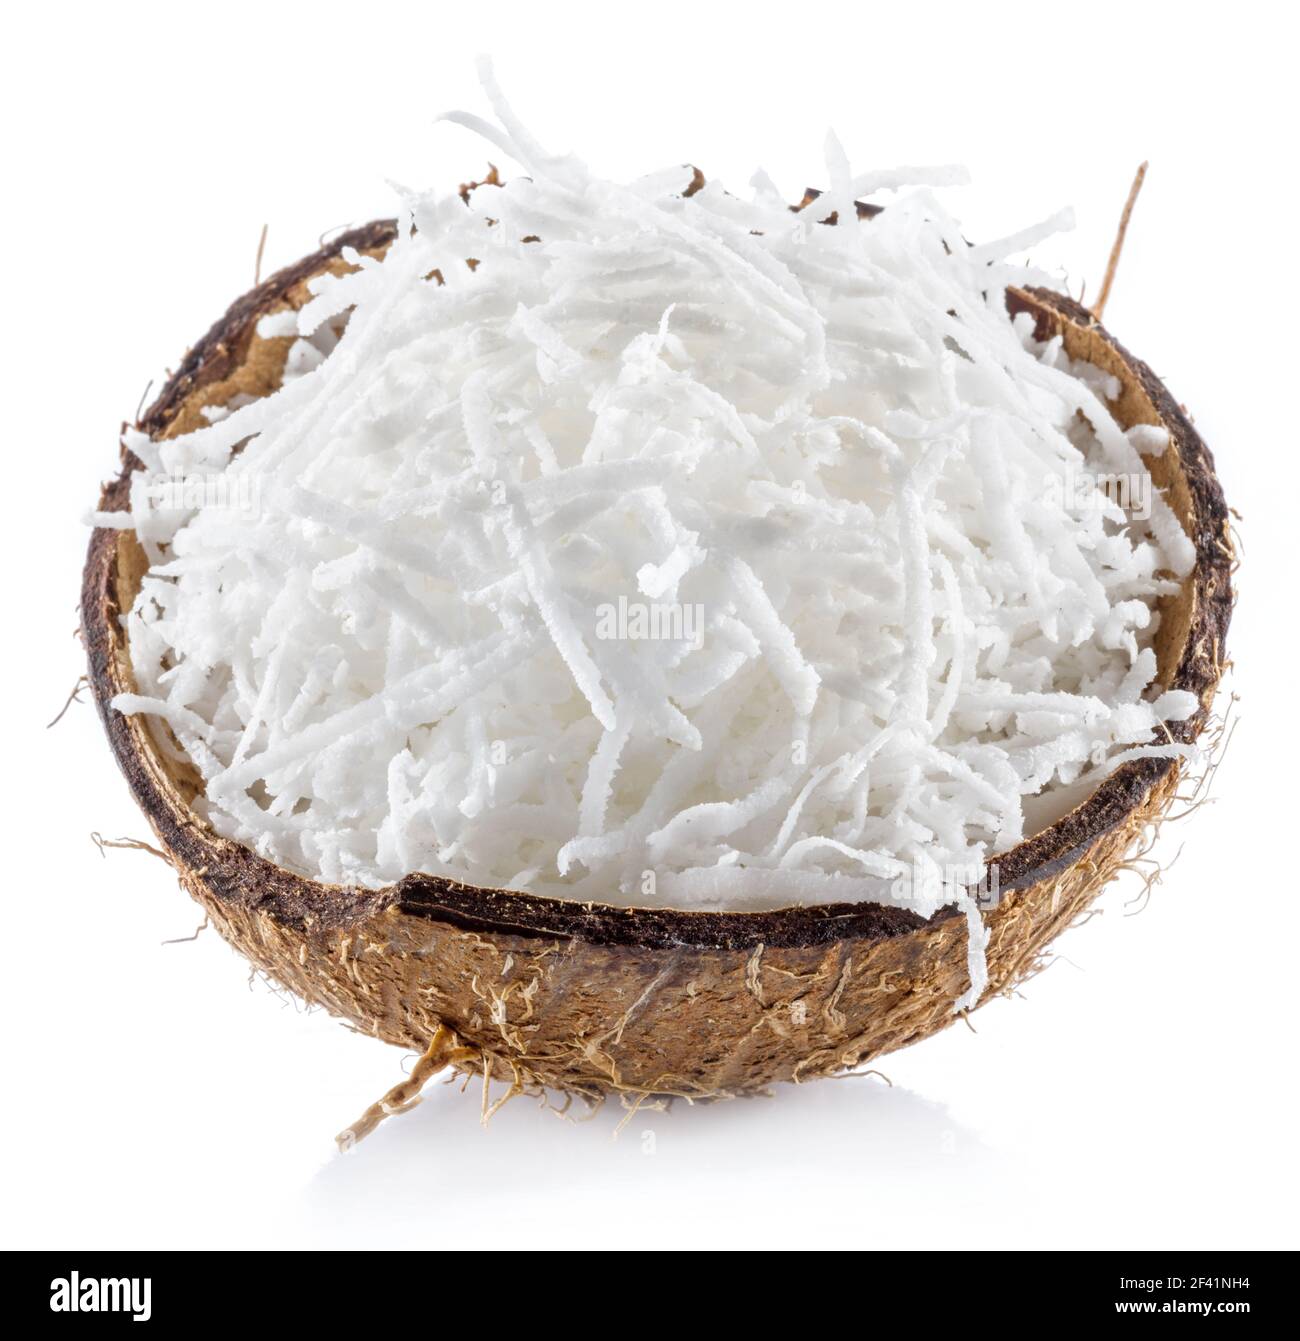 Shredded coconut flakes in the piece of coconut shell isolated on white background. Stock Photo